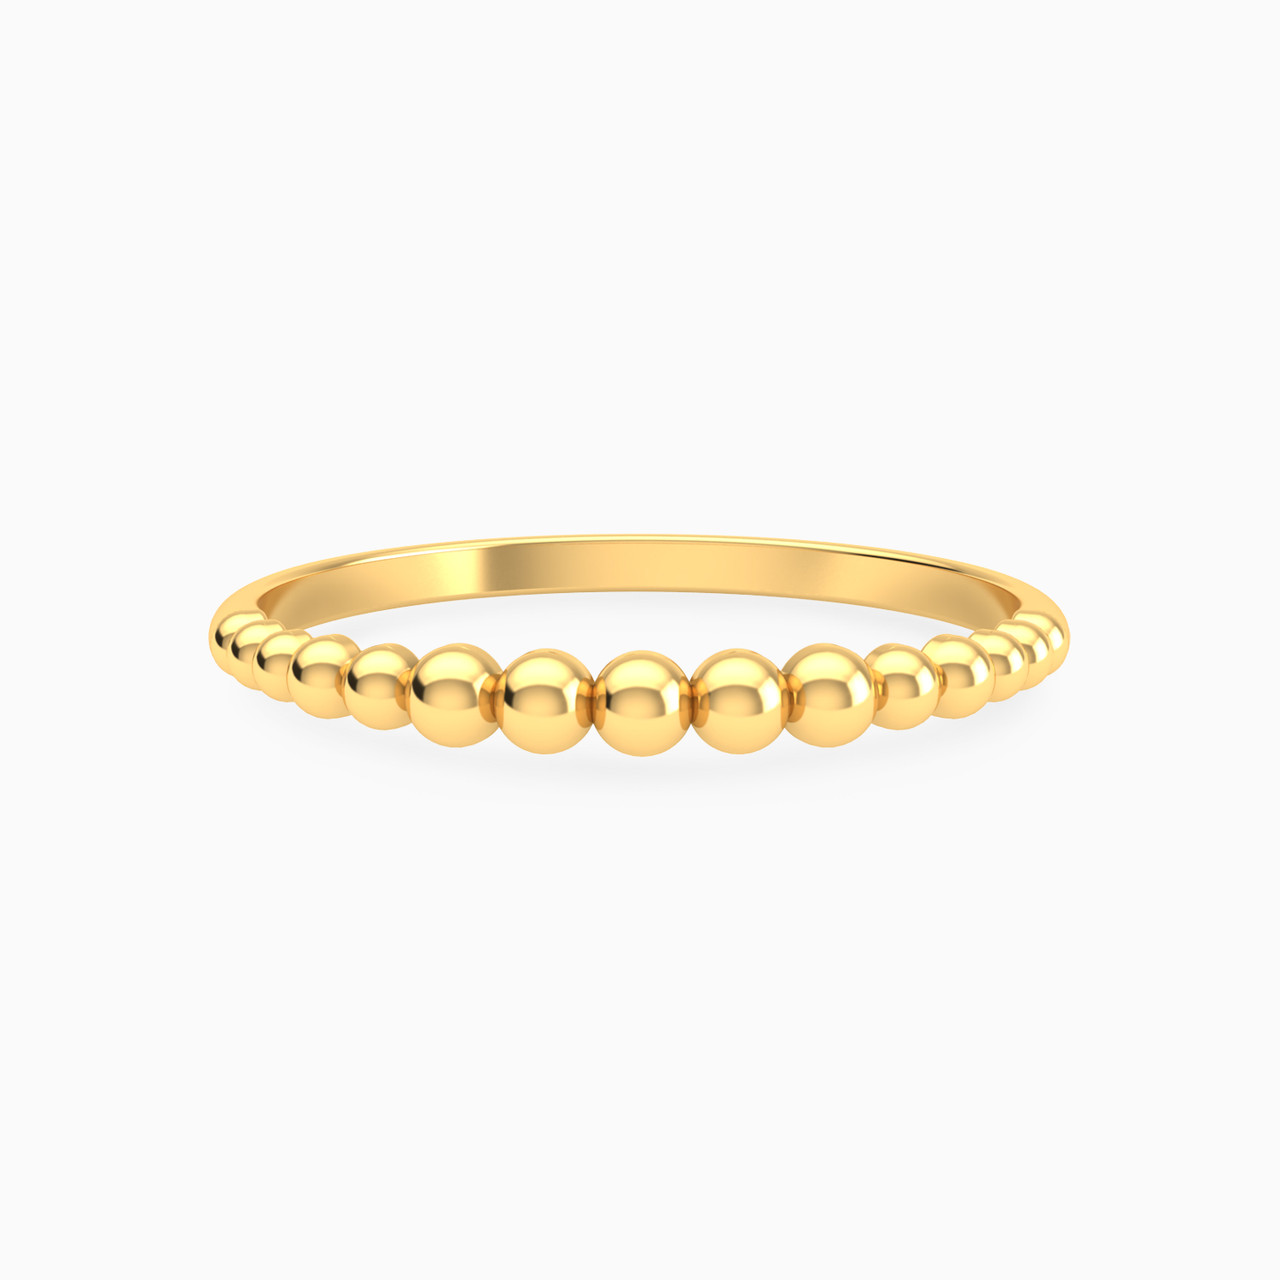 Beaded Statement Ring in 14K Gold